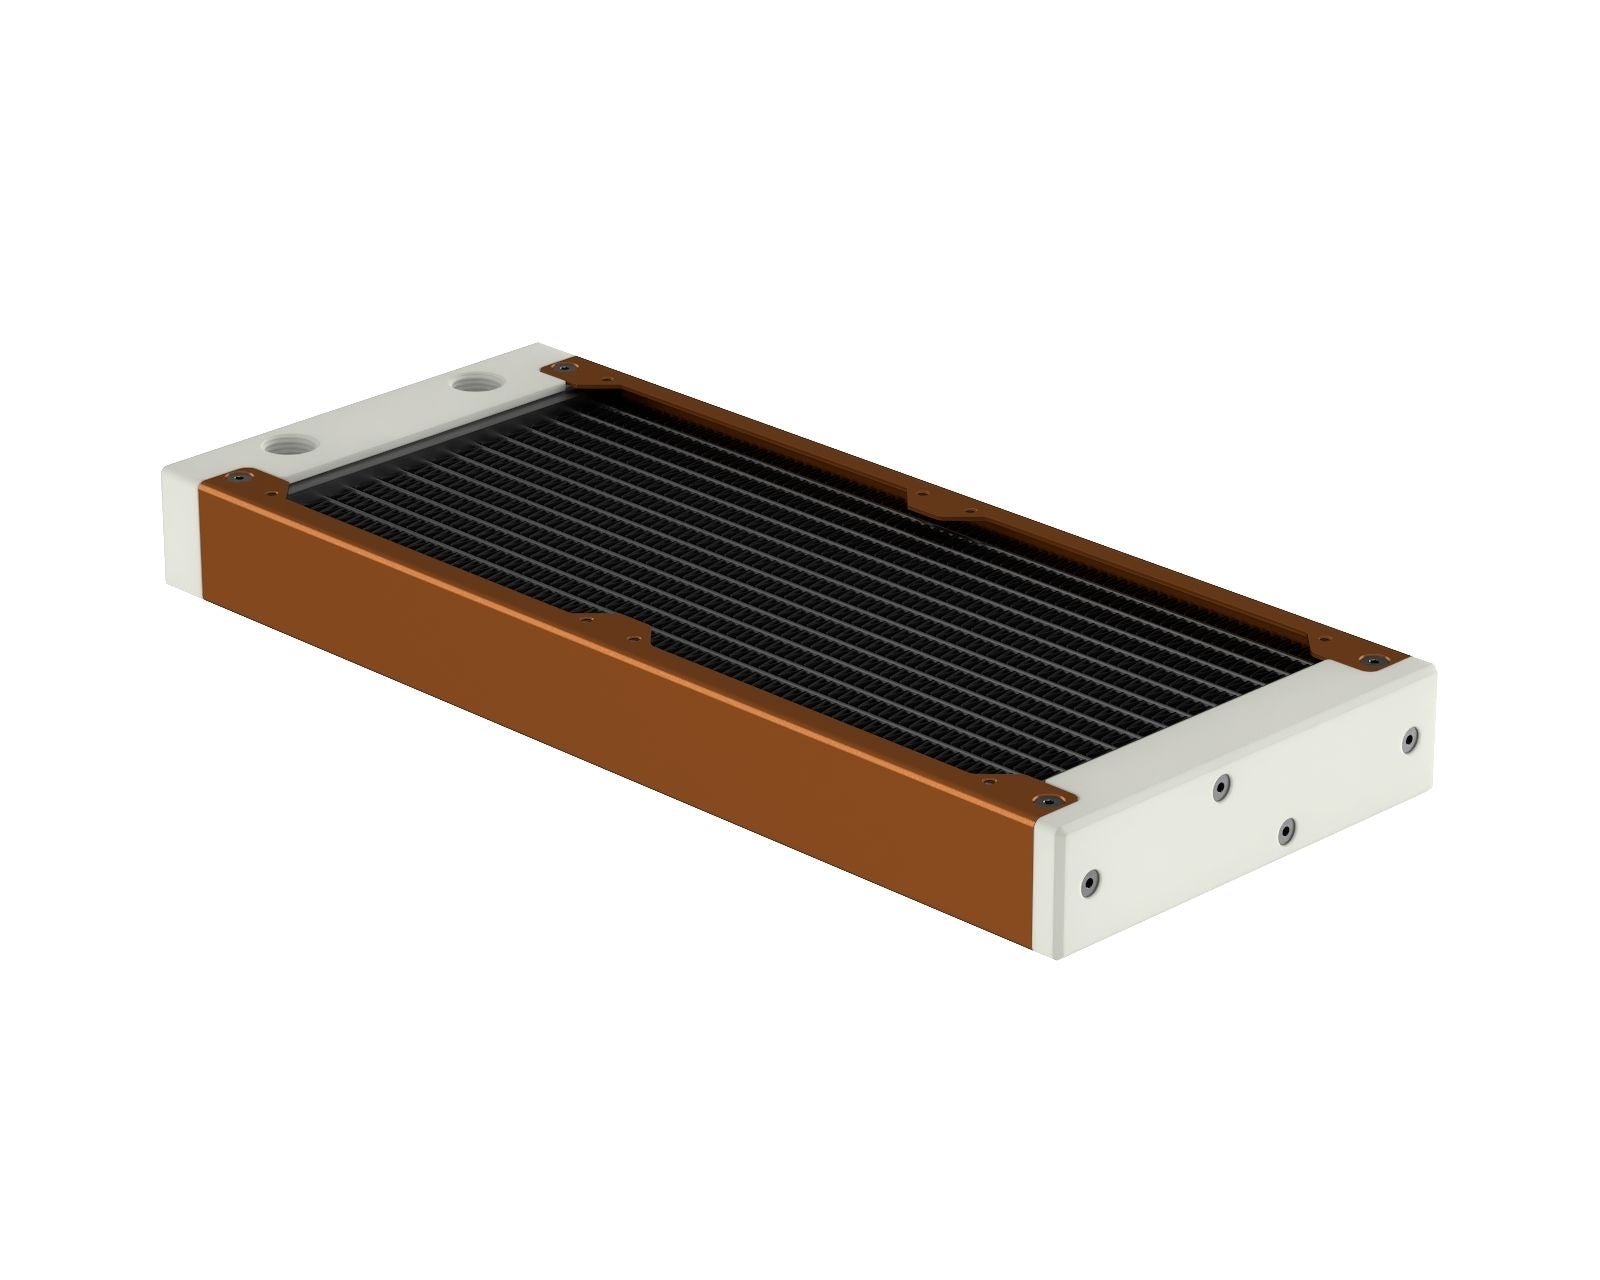 PrimoChill 240SL (30mm) EXIMO Modular Radiator, White POM, 2x120mm, Dual Fan (R-SL-W24) Available in 20+ Colors, Assembled in USA and Custom Watercooling Loop Ready - Copper